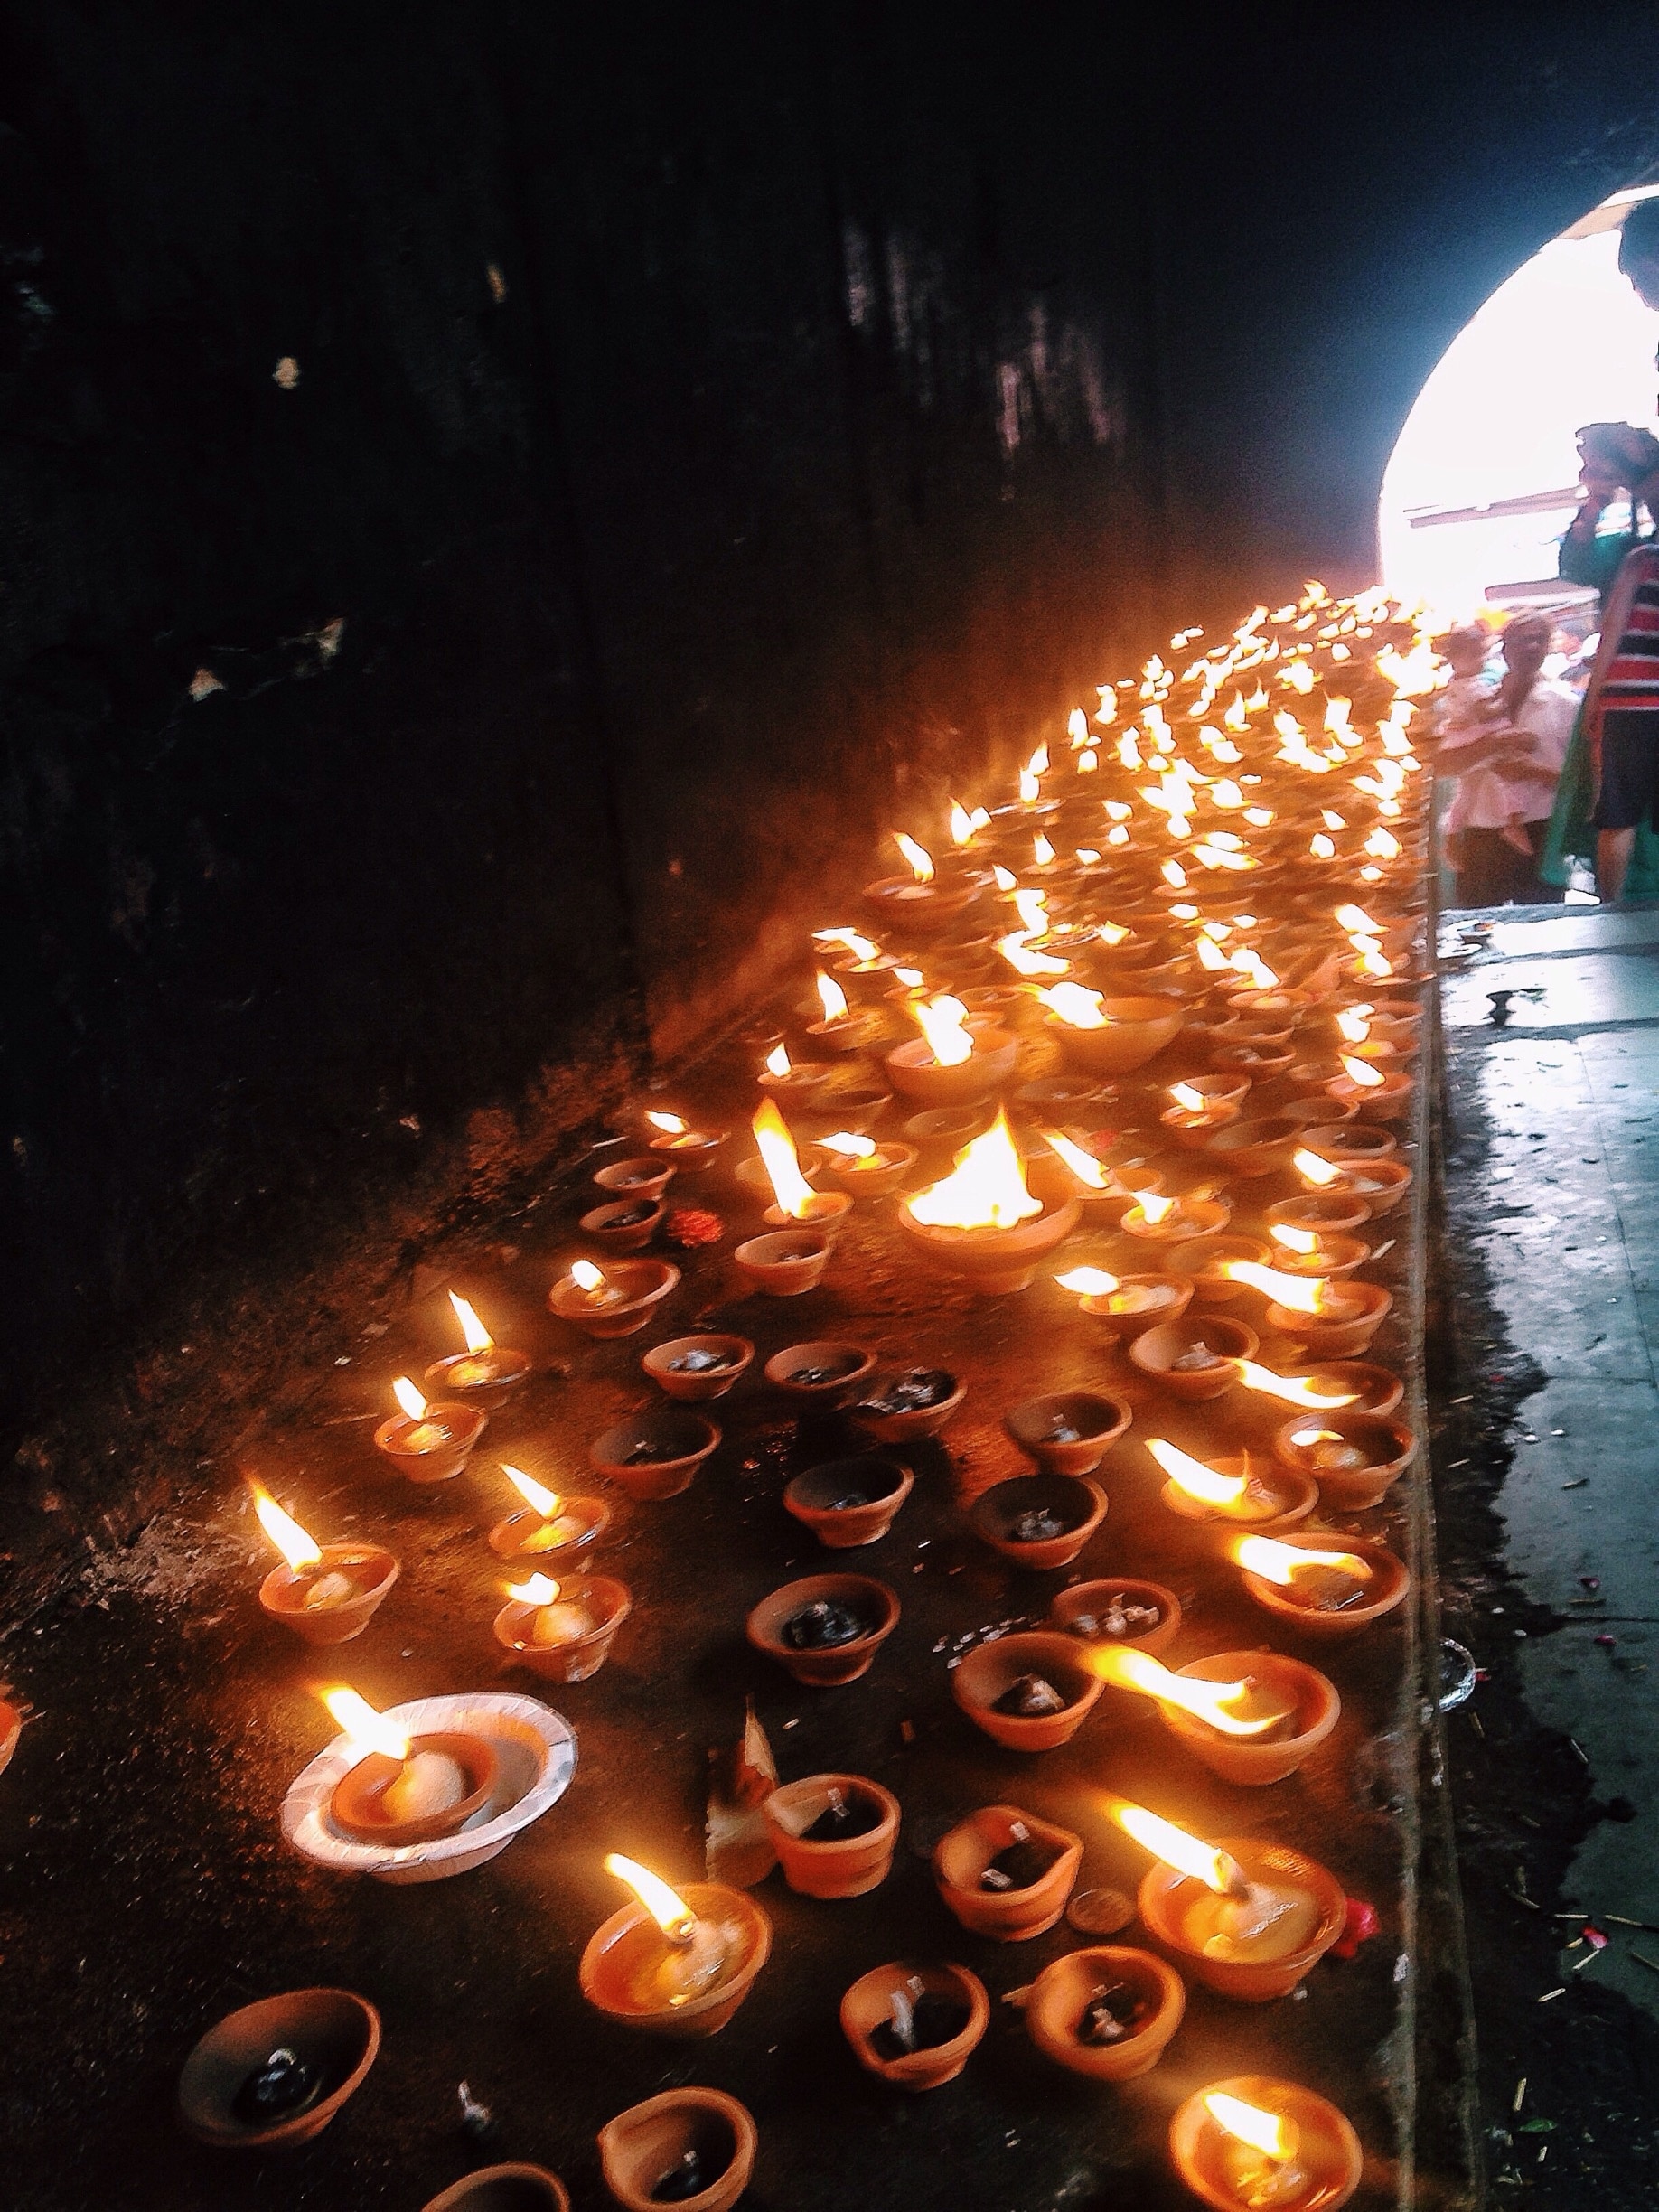 Hundreds of lamps lit by the devotees of Lord Krishna at the Banke Bihari Temple in Vrindavan, Mathura(UP, India). 
#Bestof5